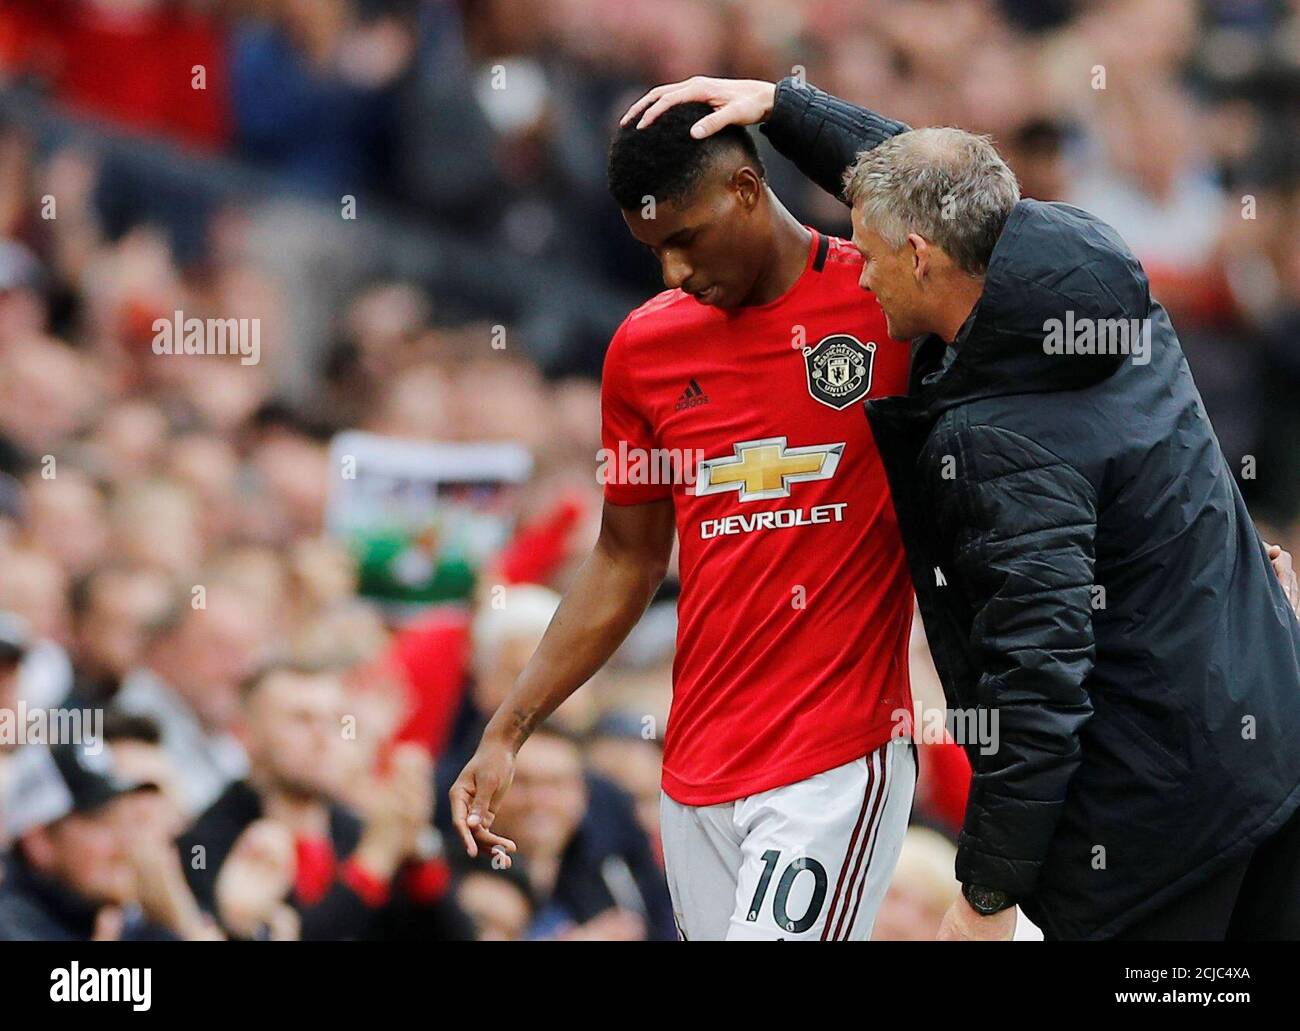 Soccer Football - Premier League - Manchester United v Chelsea - Old Trafford, Manchester, Britain - August 11, 2019  Manchester United's Marcus Rashford is congratulated by manager Ole Gunnar Solskjaer as he is substituted  REUTERS/Phil Noble  EDITORIAL USE ONLY. No use with unauthorized audio, video, data, fixture lists, club/league logos or 'live' services. Online in-match use limited to 75 images, no video emulation. No use in betting, games or single club/league/player publications.  Please contact your account representative for further details. Stock Photo